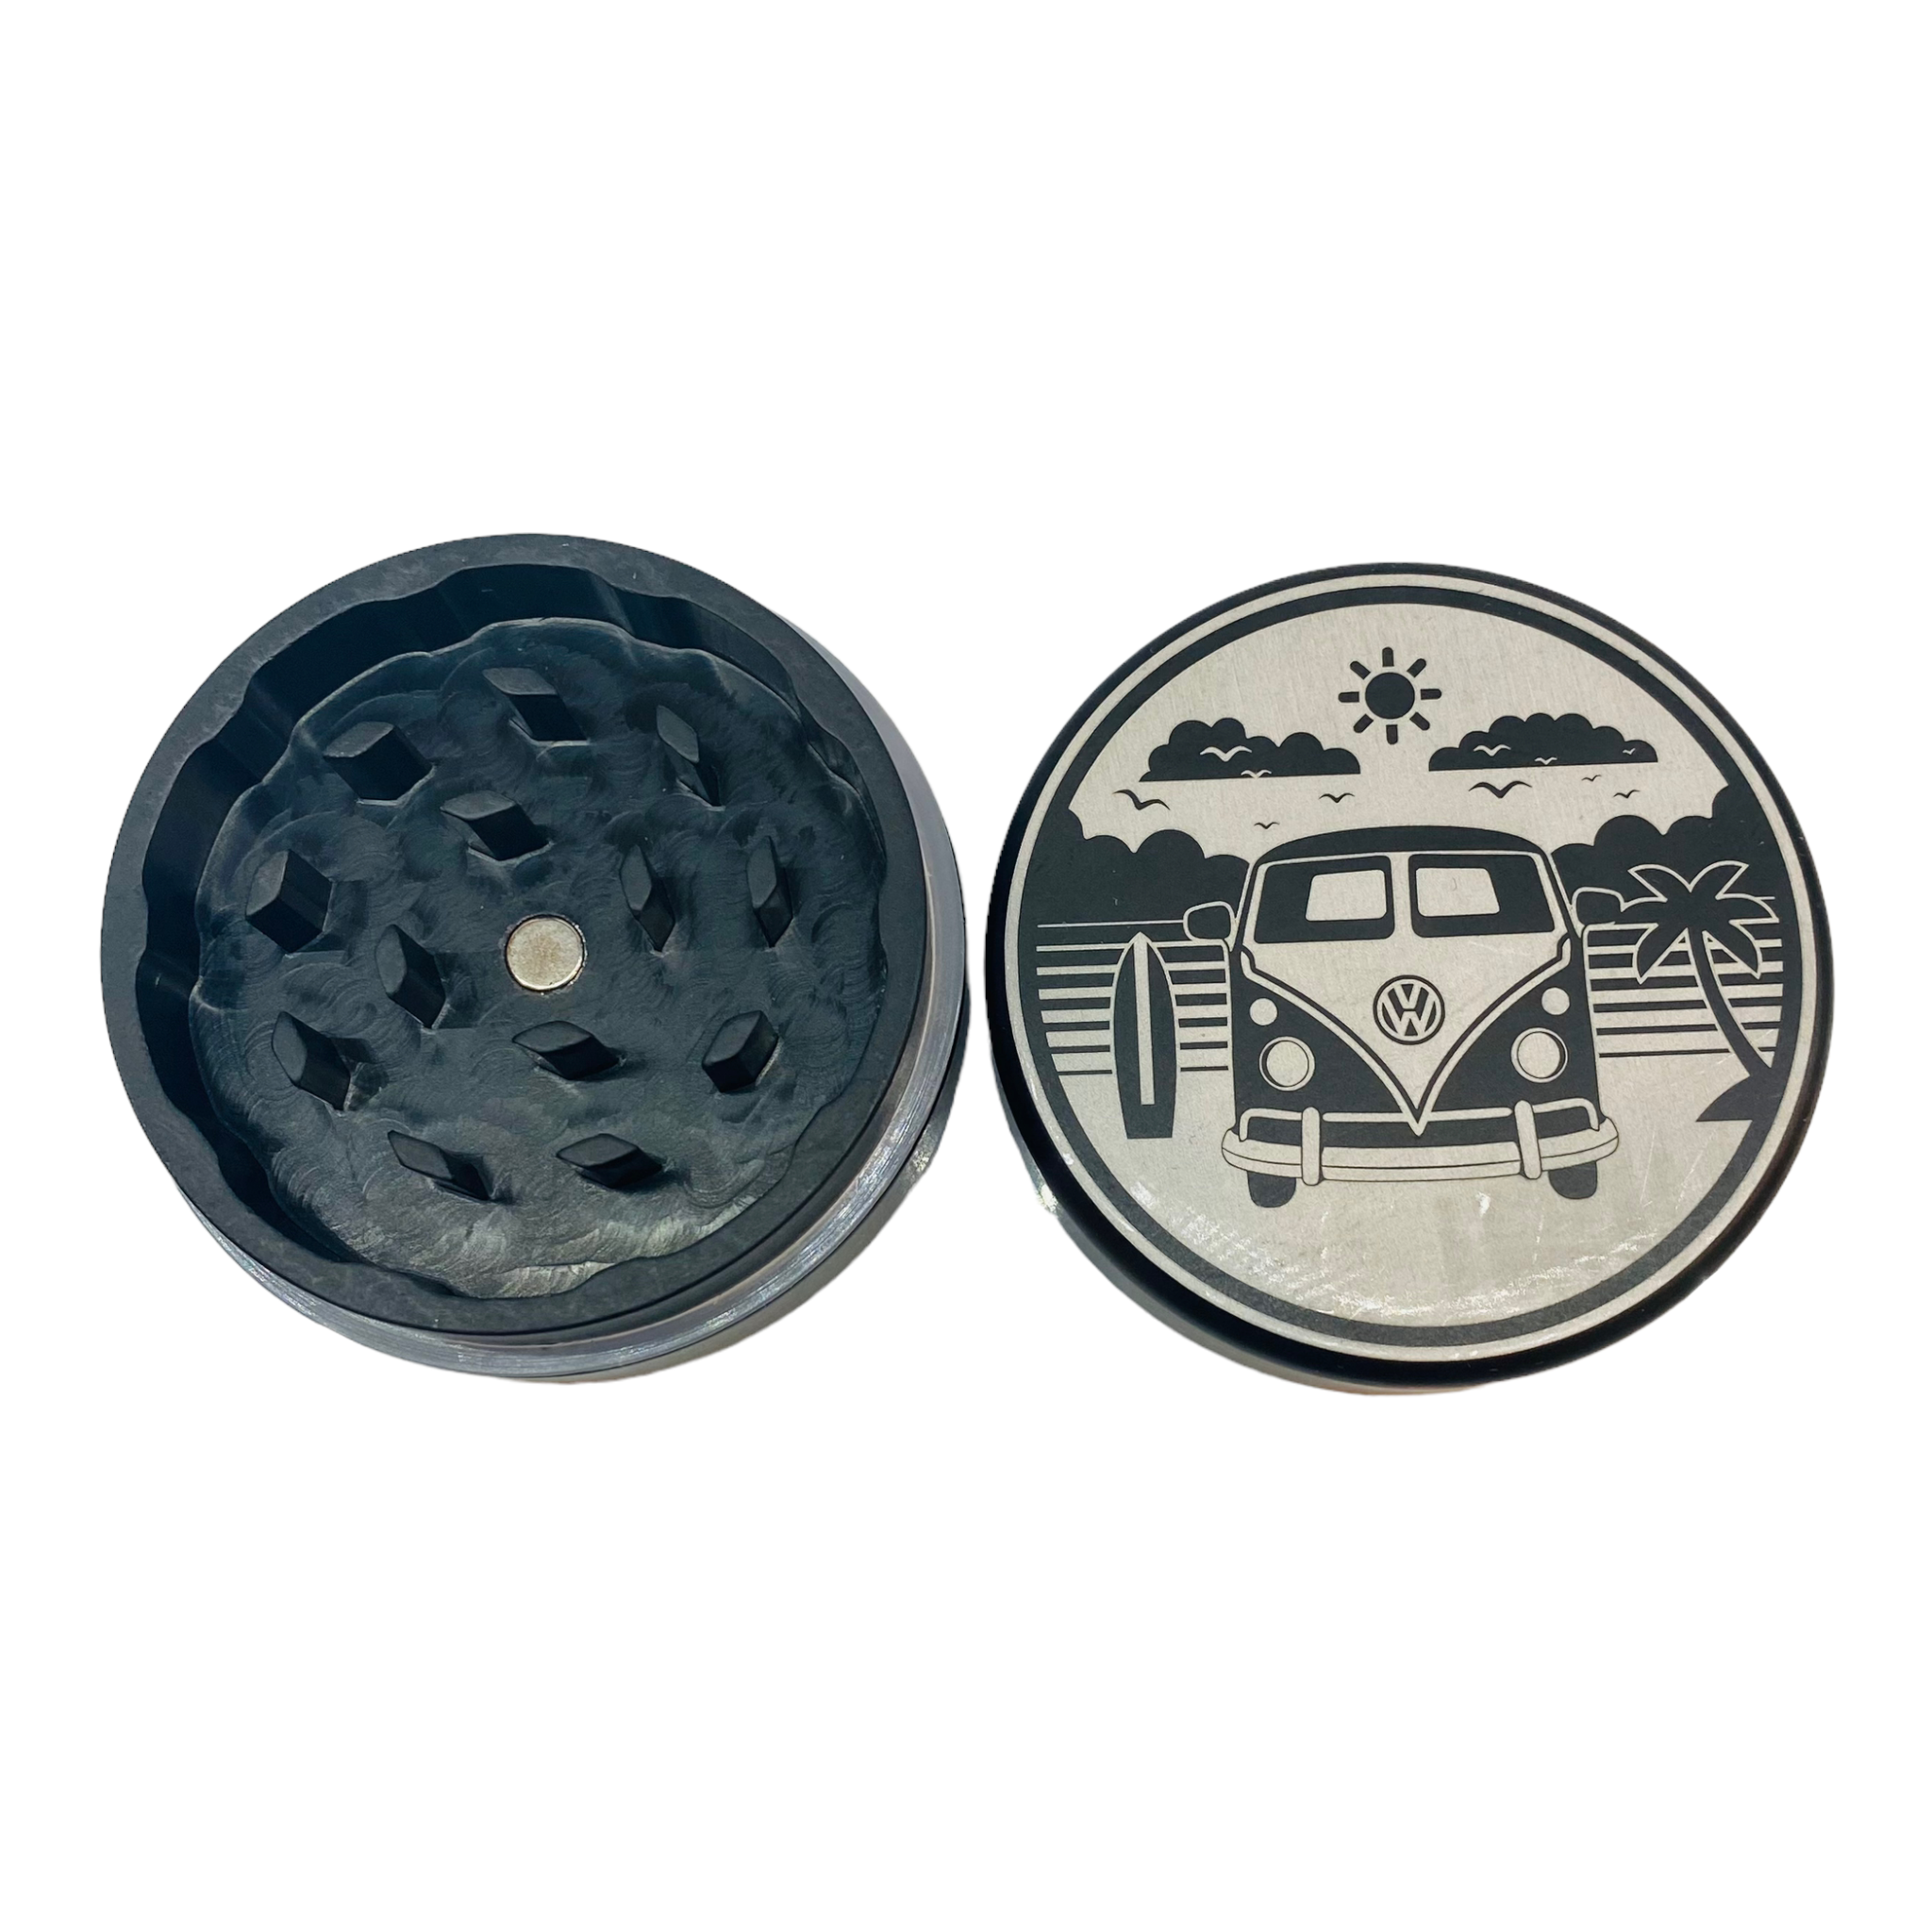 Tahoe Grinders Black Anodized Aluminum Large Two Piece Weed Grinder With VW Bus On Beach